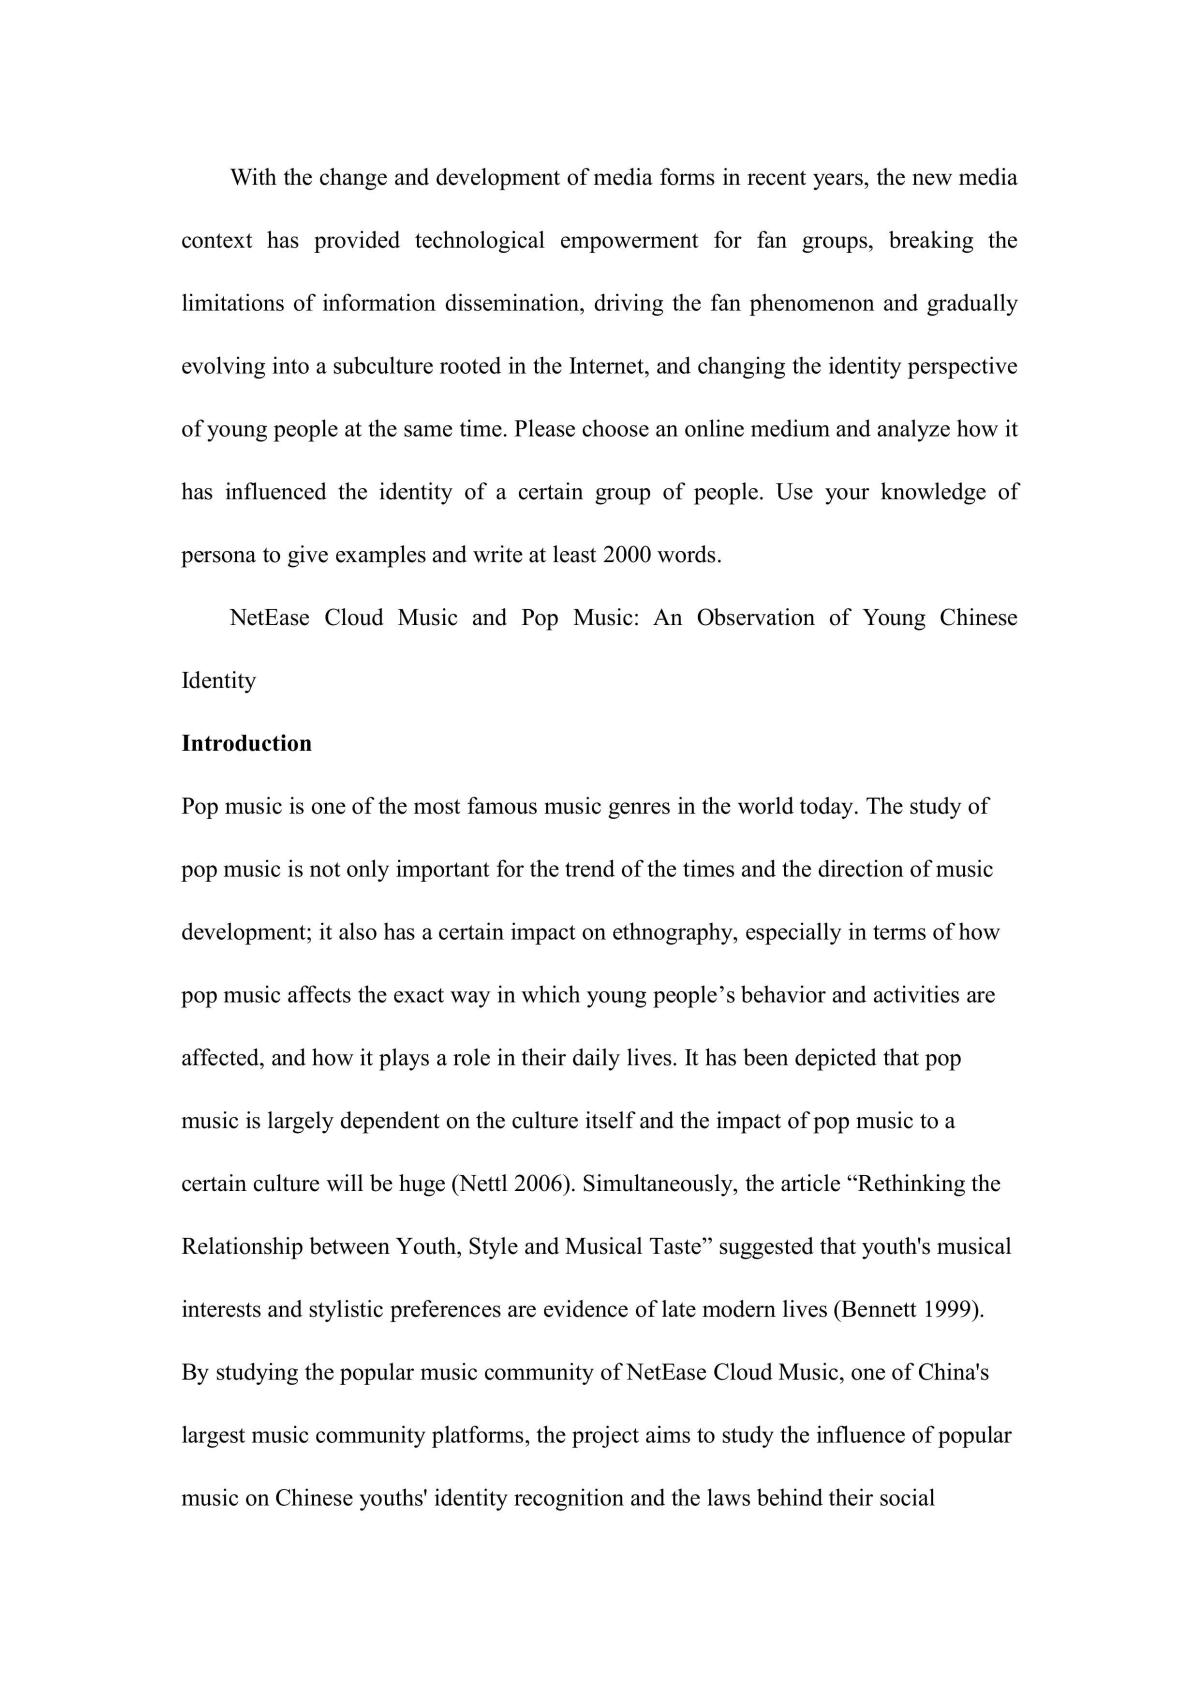 NetEase Cloud Music and Pop Music: An Observation of Young Chinese Identity - Page 1